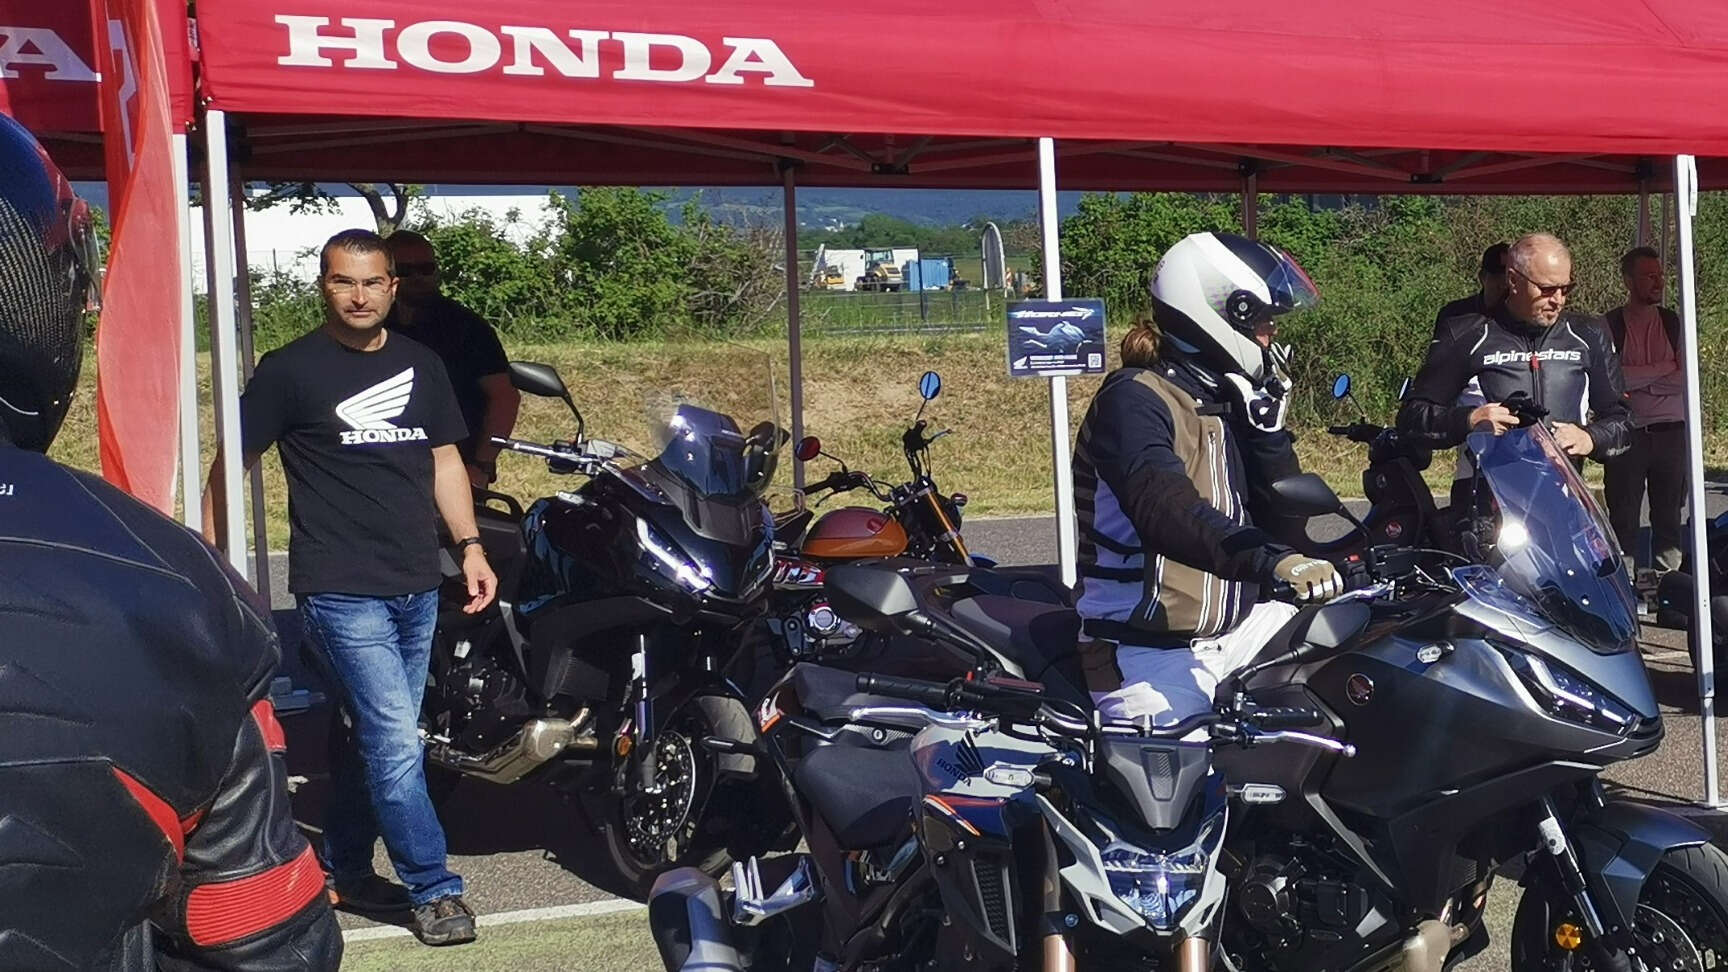 Honda Austria Testtage event with riders and guide